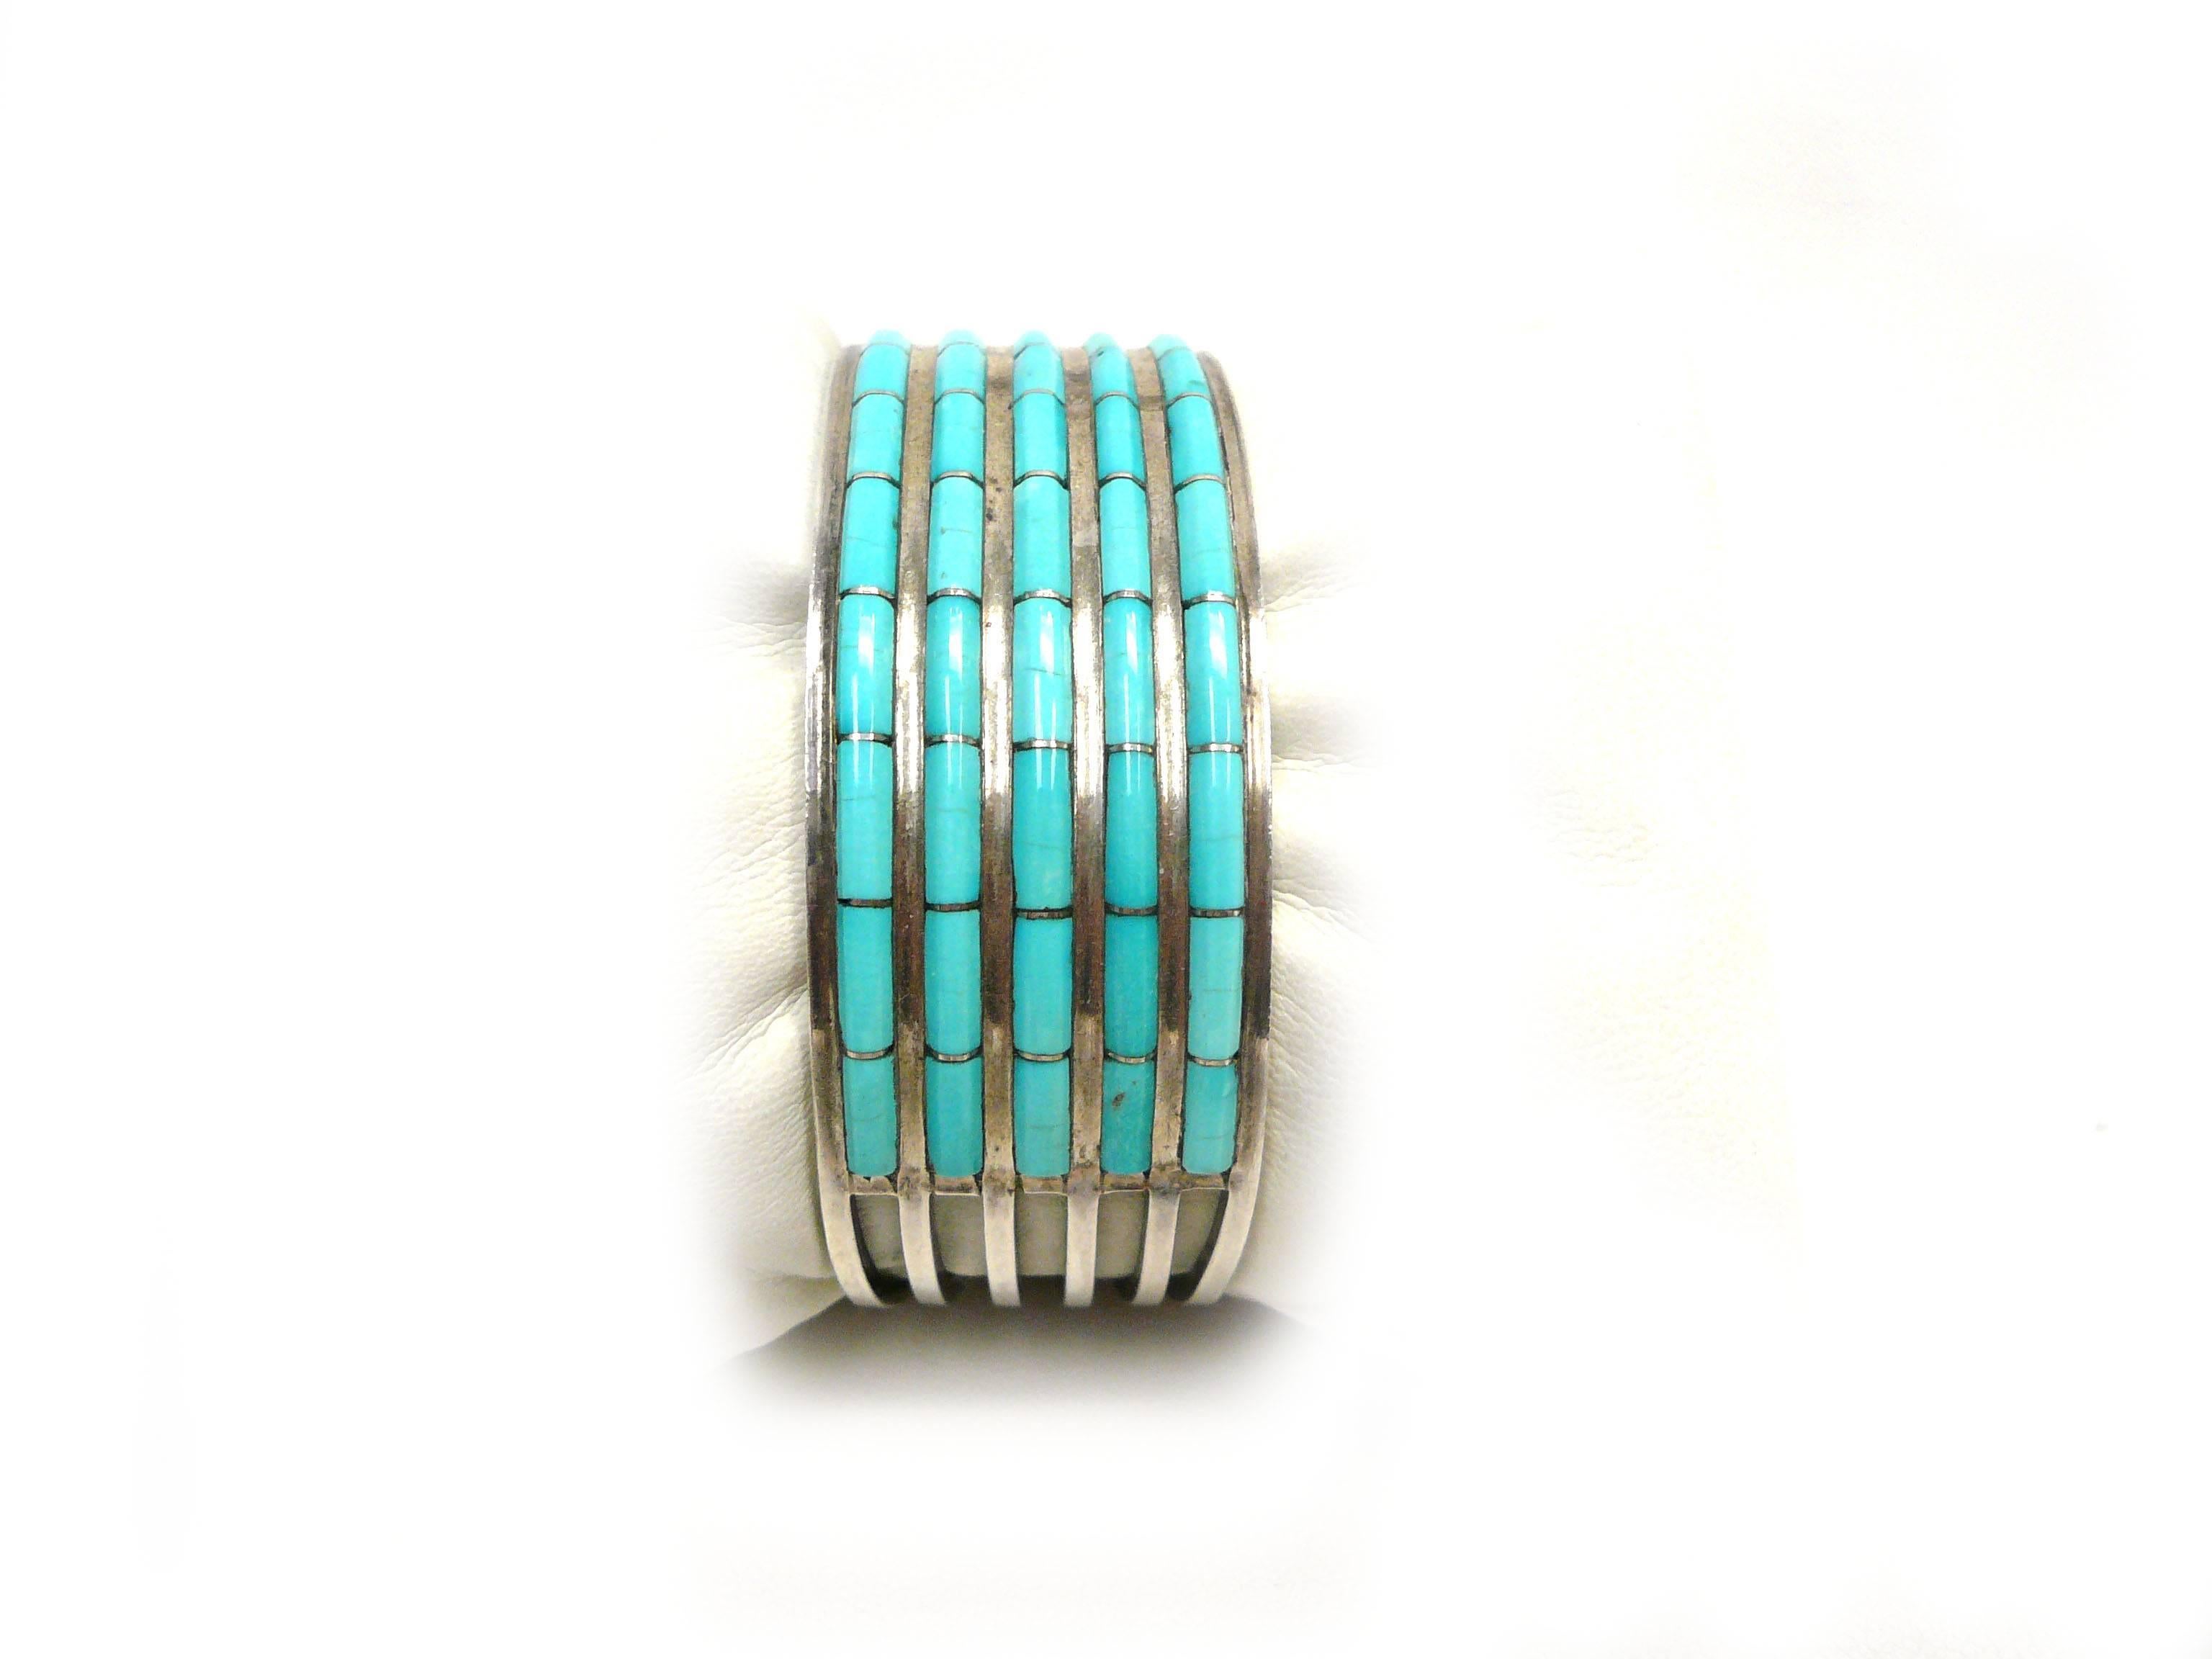 Handsome Cuff Turquoise & Sterling Silver. Bracelet features a spread wire design with five rows and turquoise inlay. Signed AWL for Zuni Native American Designer couple Anson and Letitia Wallace. The Zuni are known for their impeccable inlay